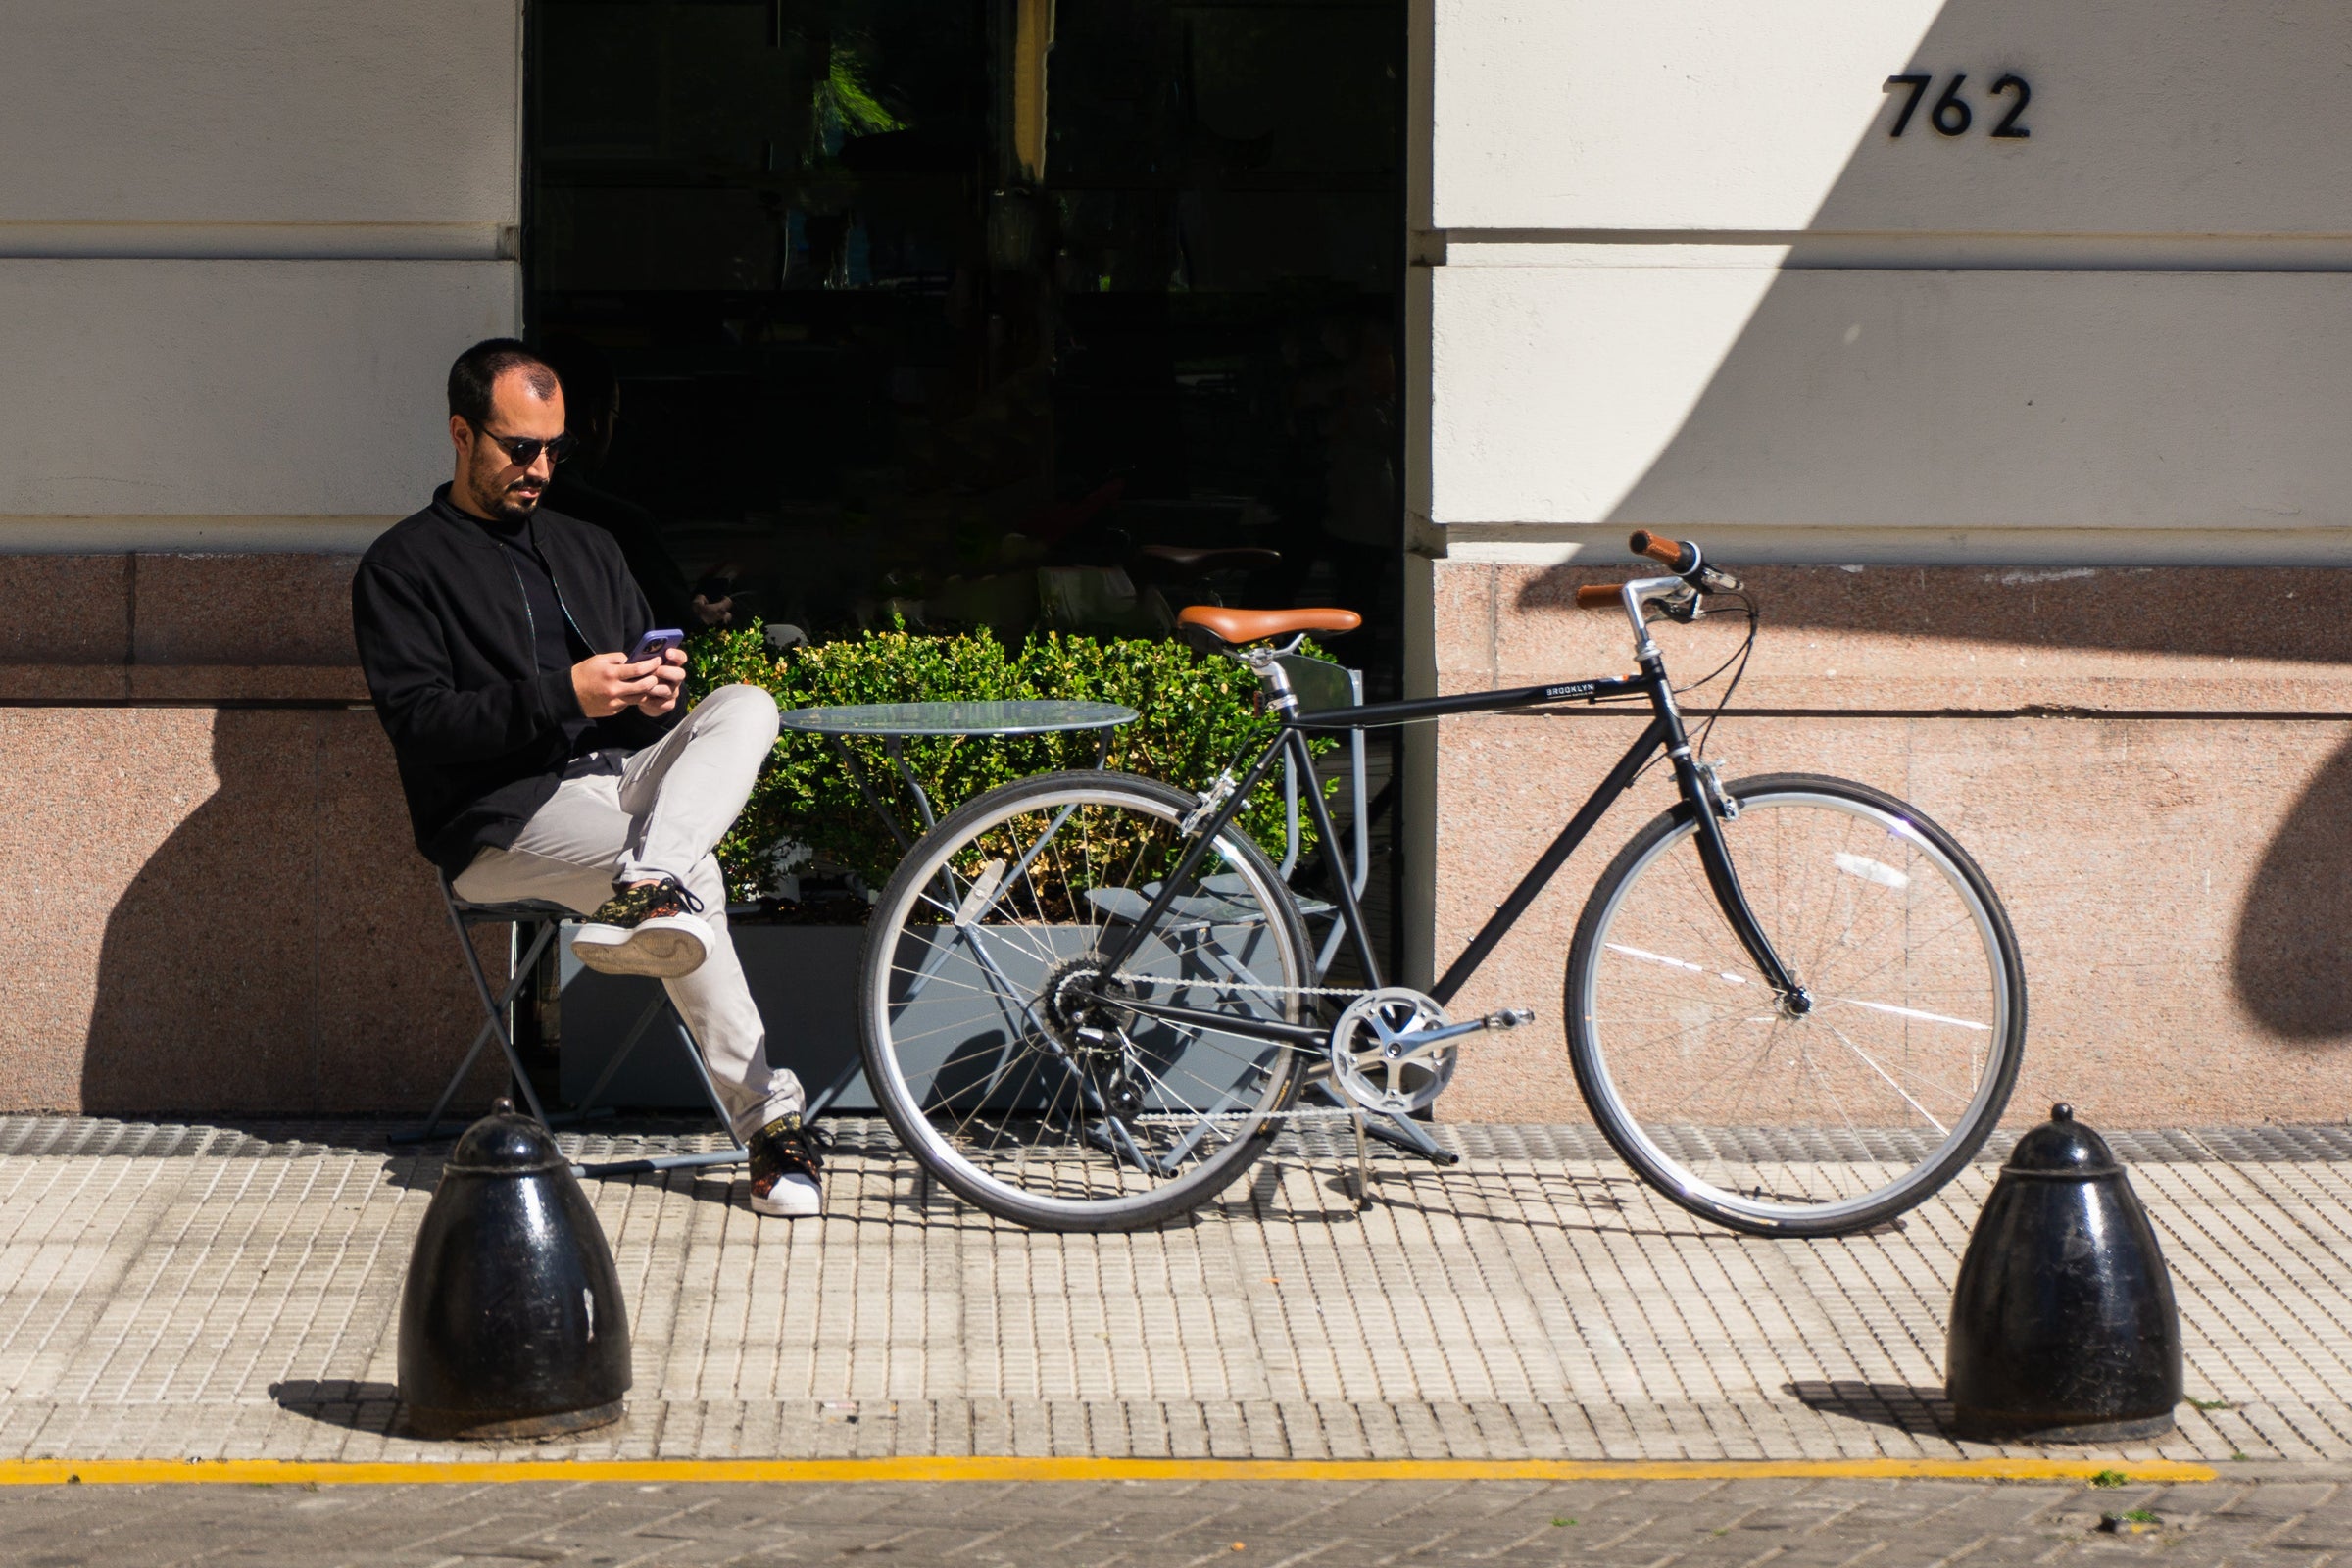 Black Bedford bike with man sitting to the left on his phone